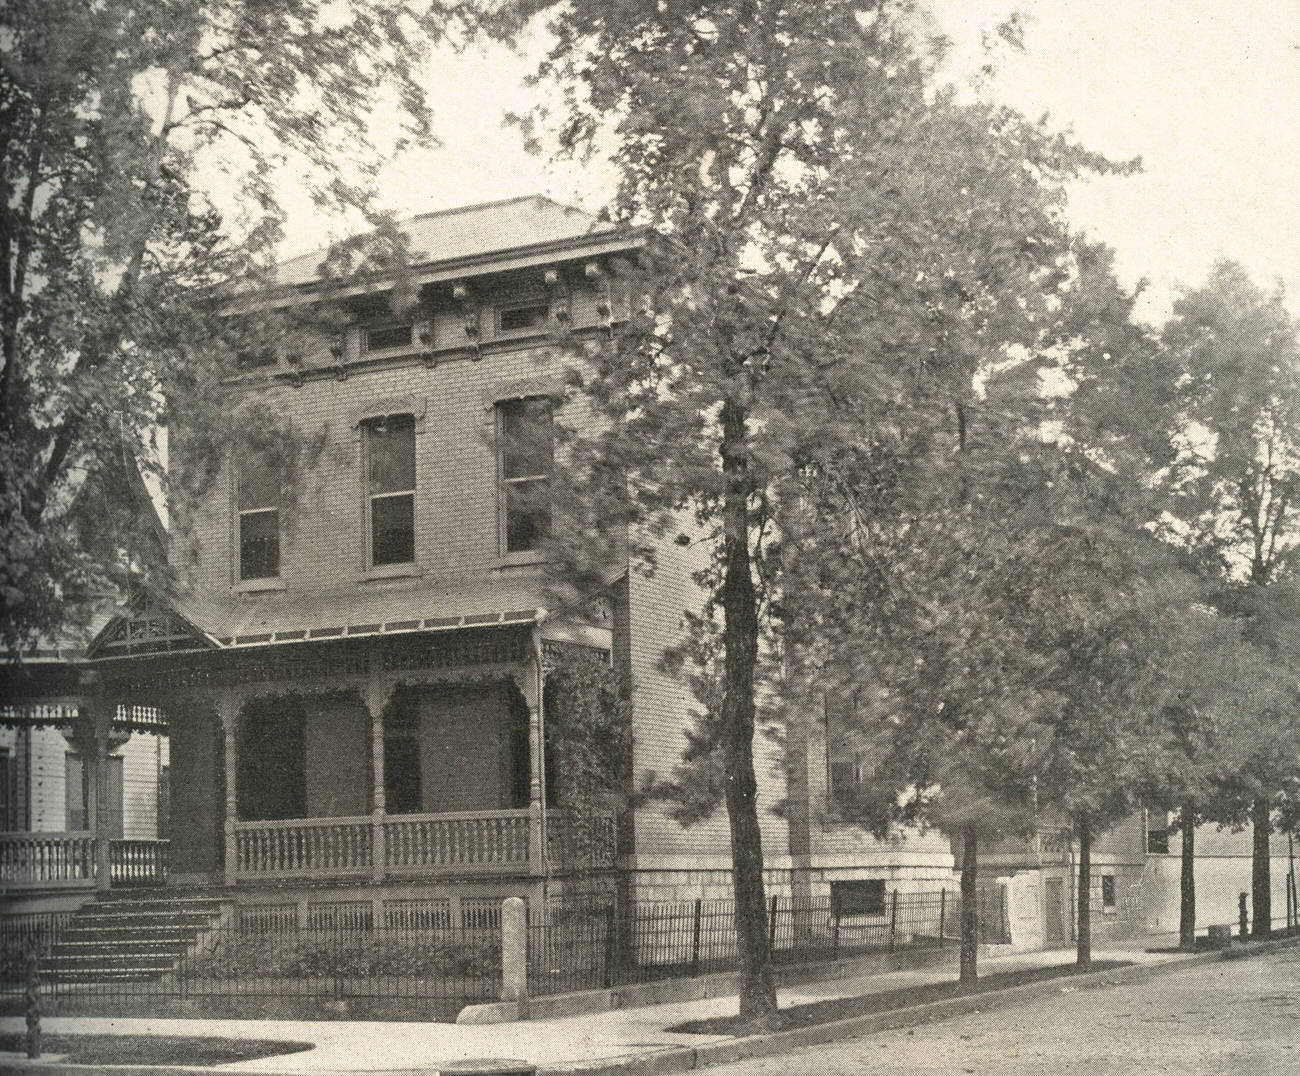 Dr. Samuel Brubaker Hartman House, completed in 1883, later a regional headquarters for the U.S. War Production Board, Circa 1901